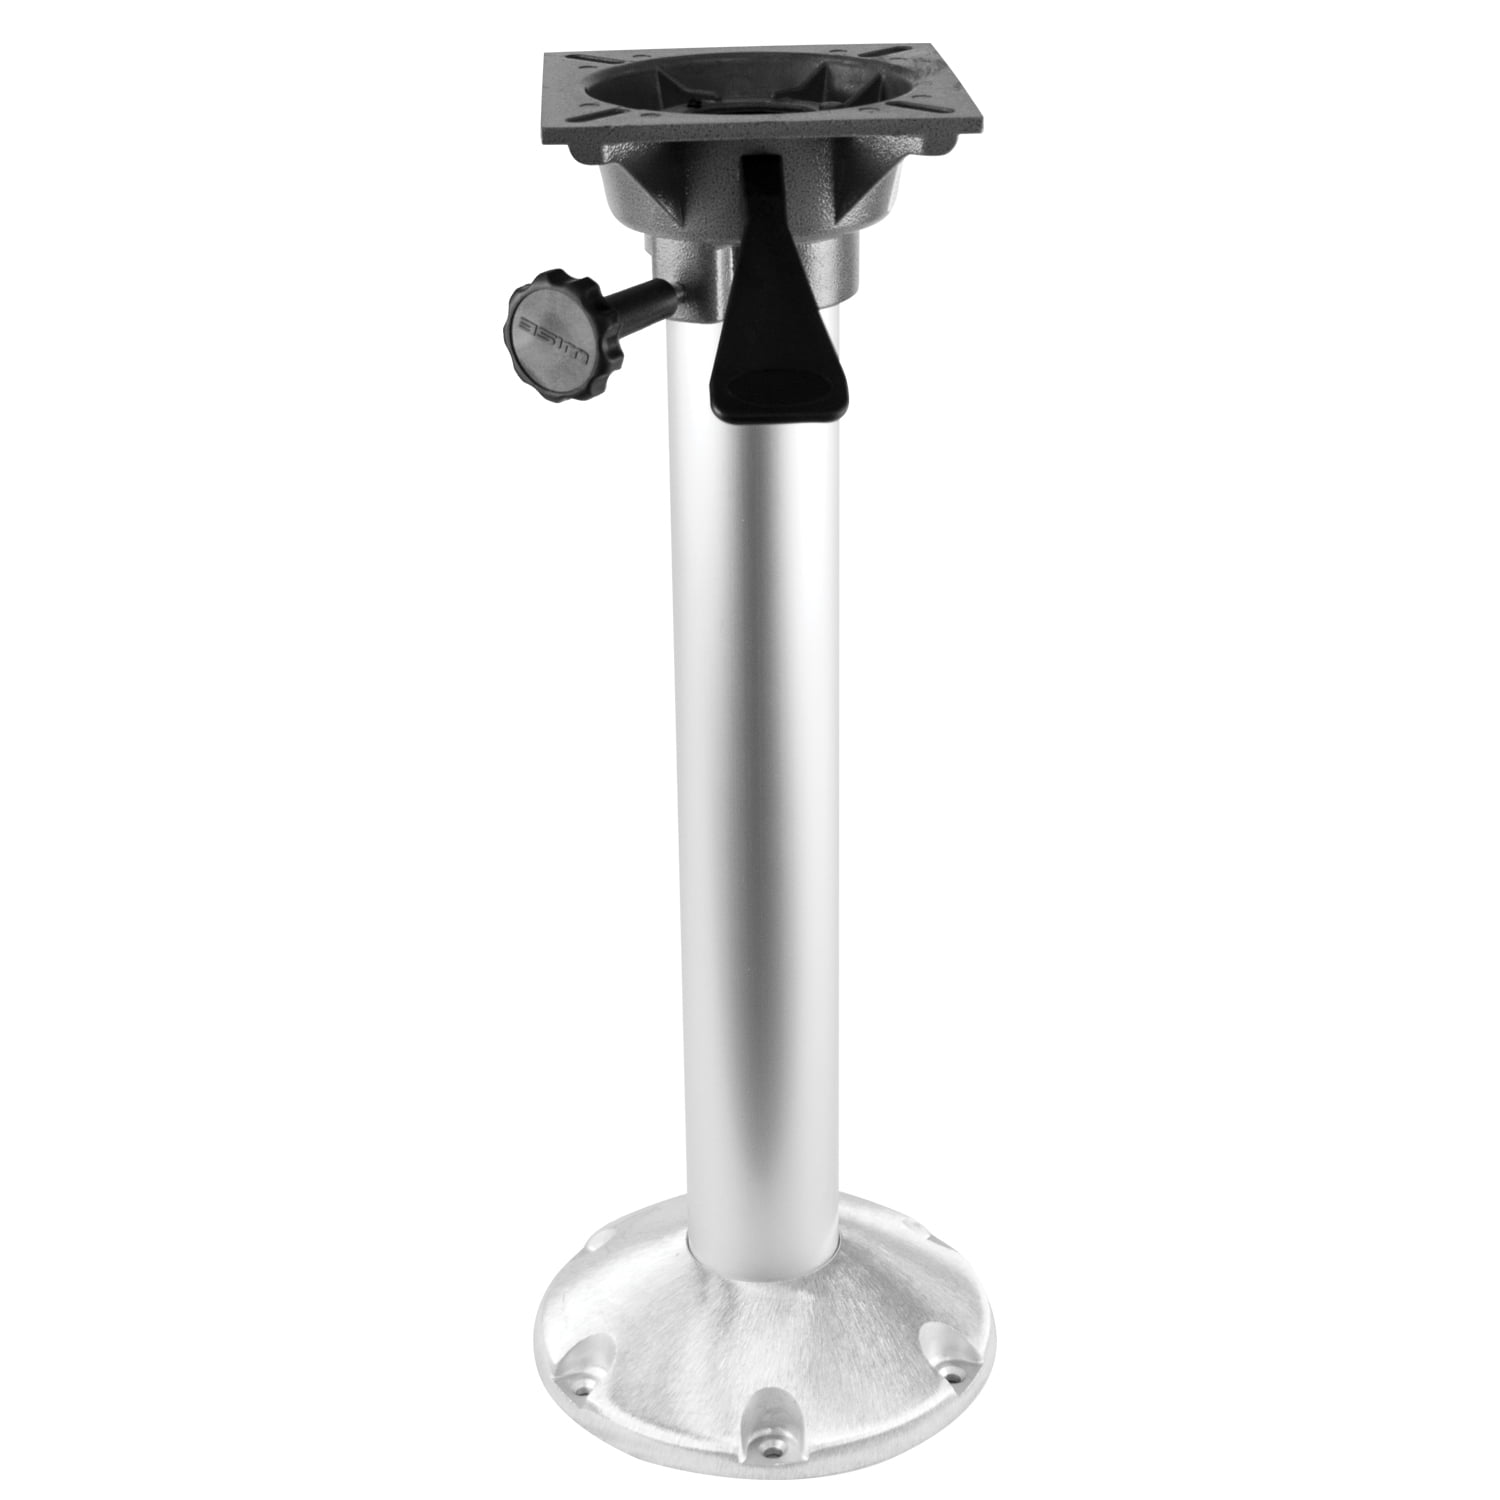 BOAT SEAT ACTION 8" FIXED HEIGHT PEDESTAL POST W/ SWIVEL MADE IN USA 7" WITHOUT